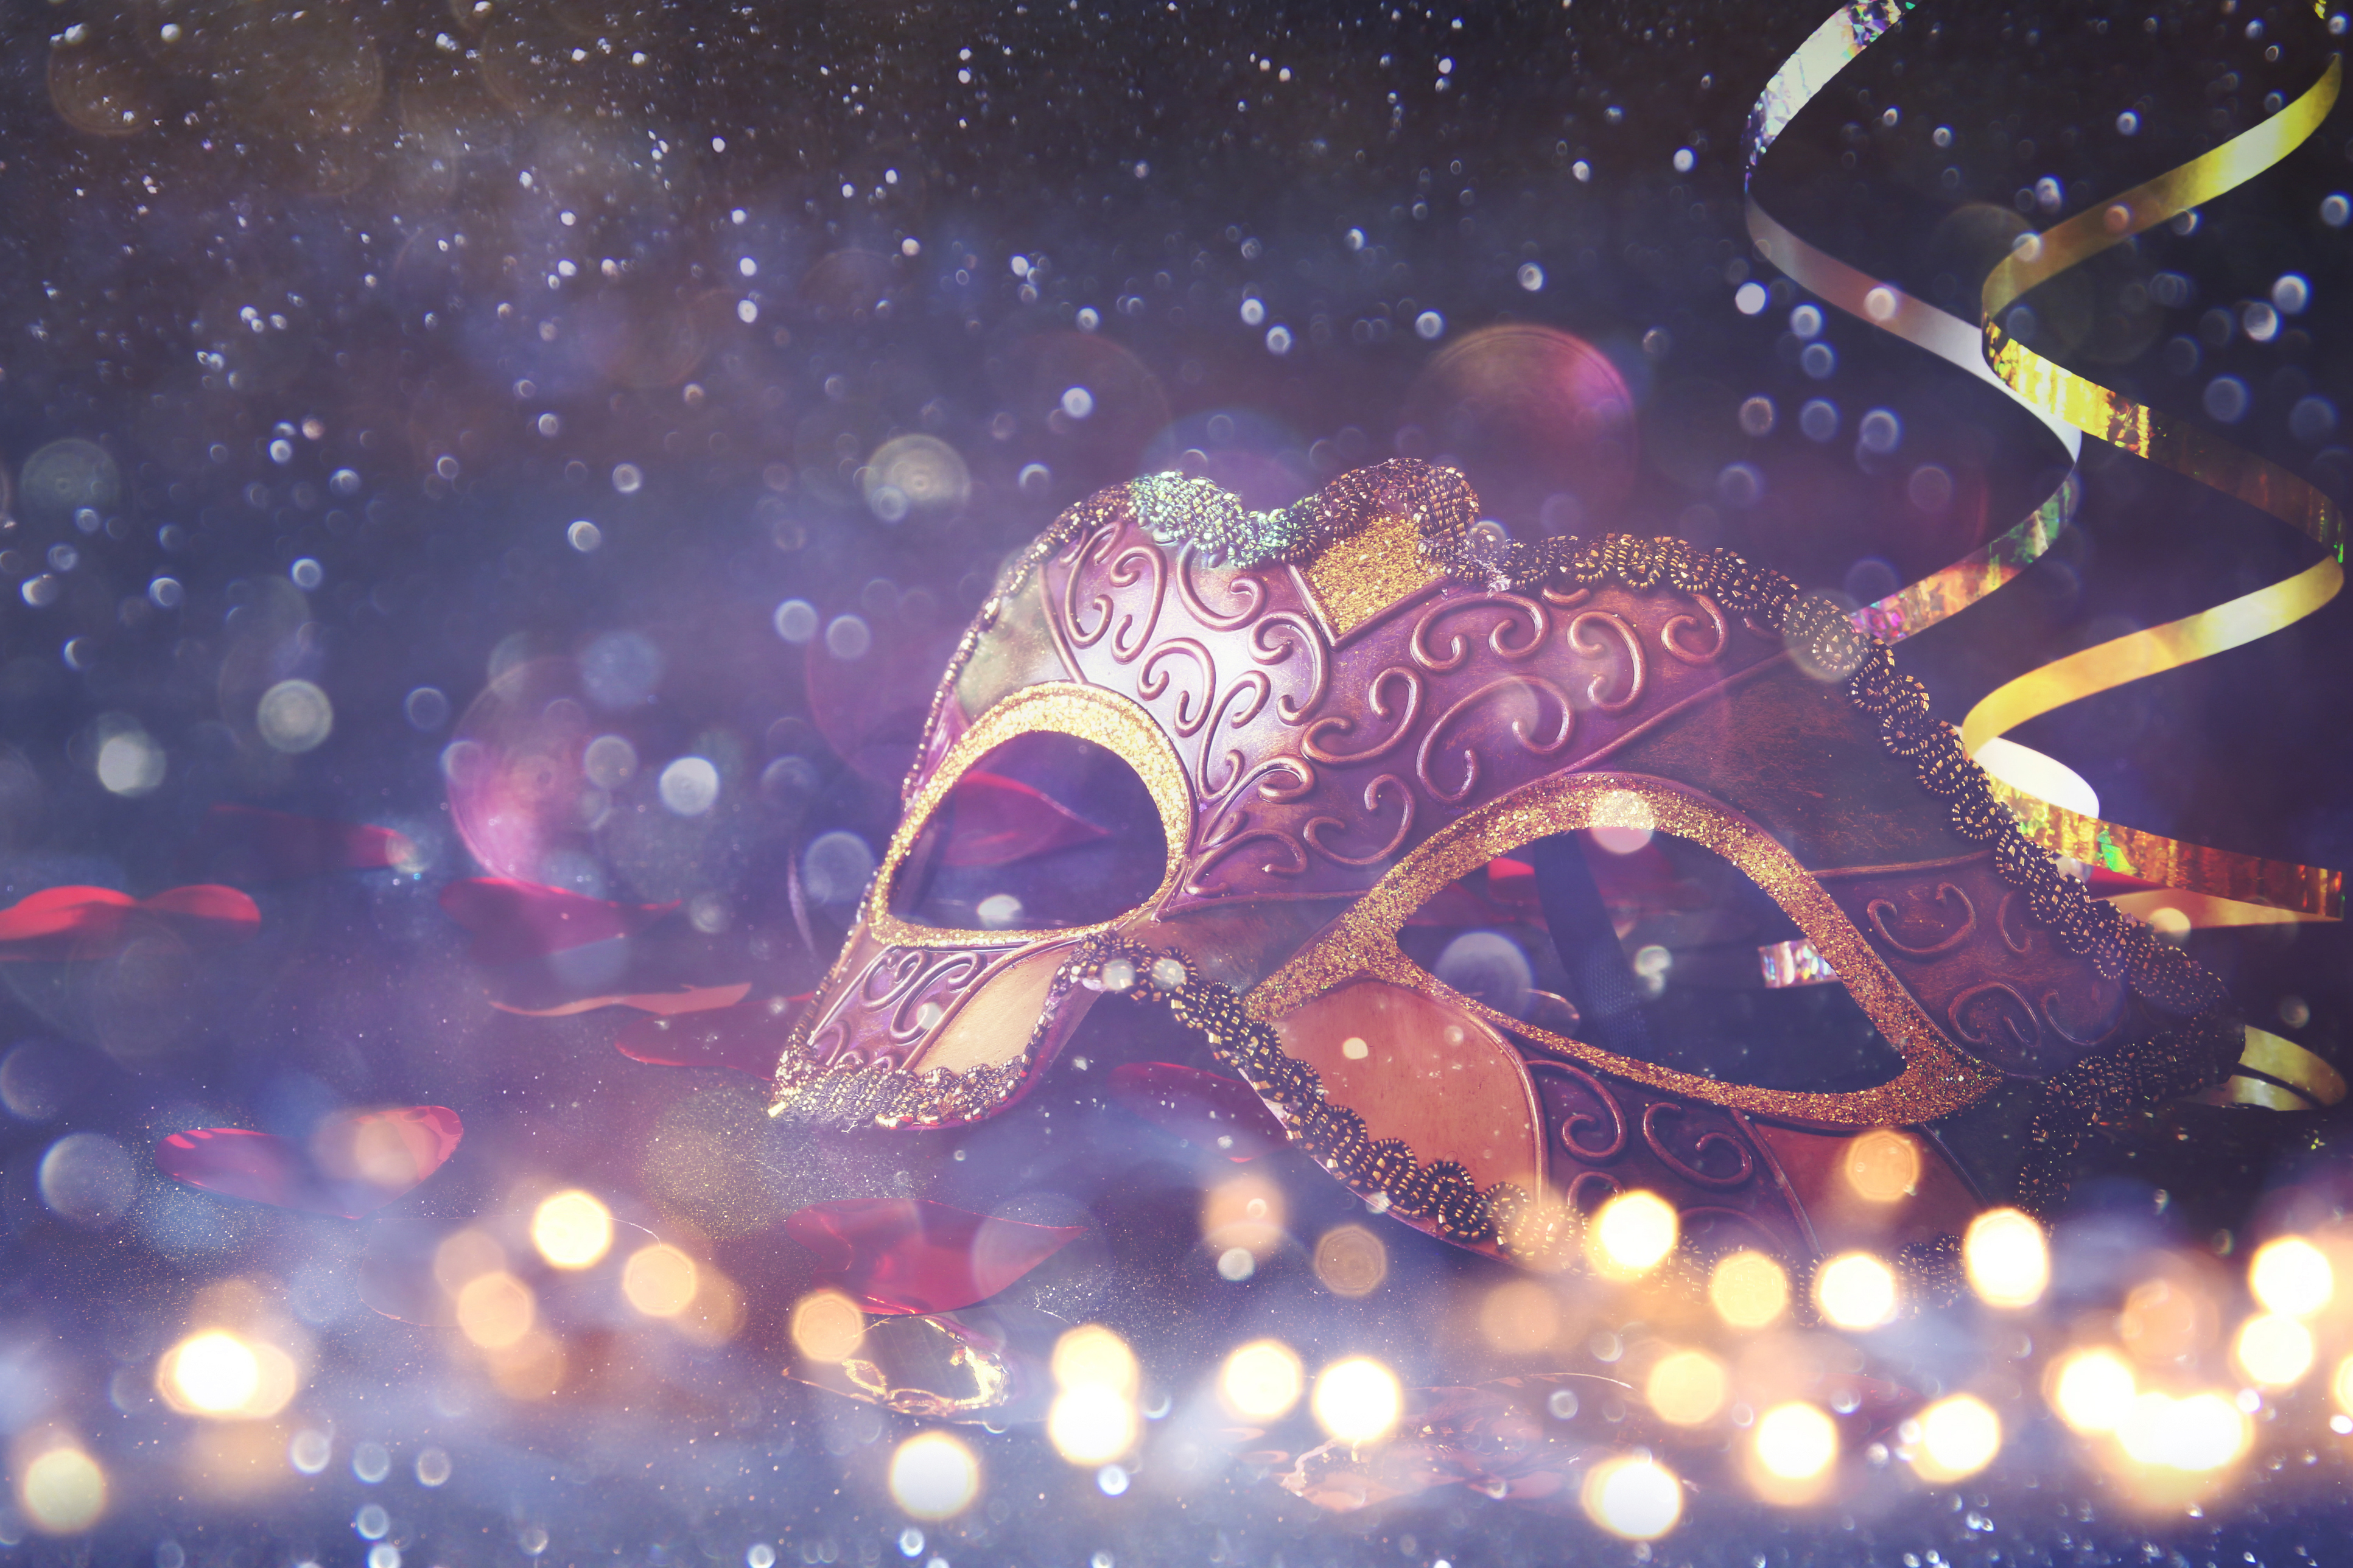 A mask with gold ribbons and purple and gold glitter